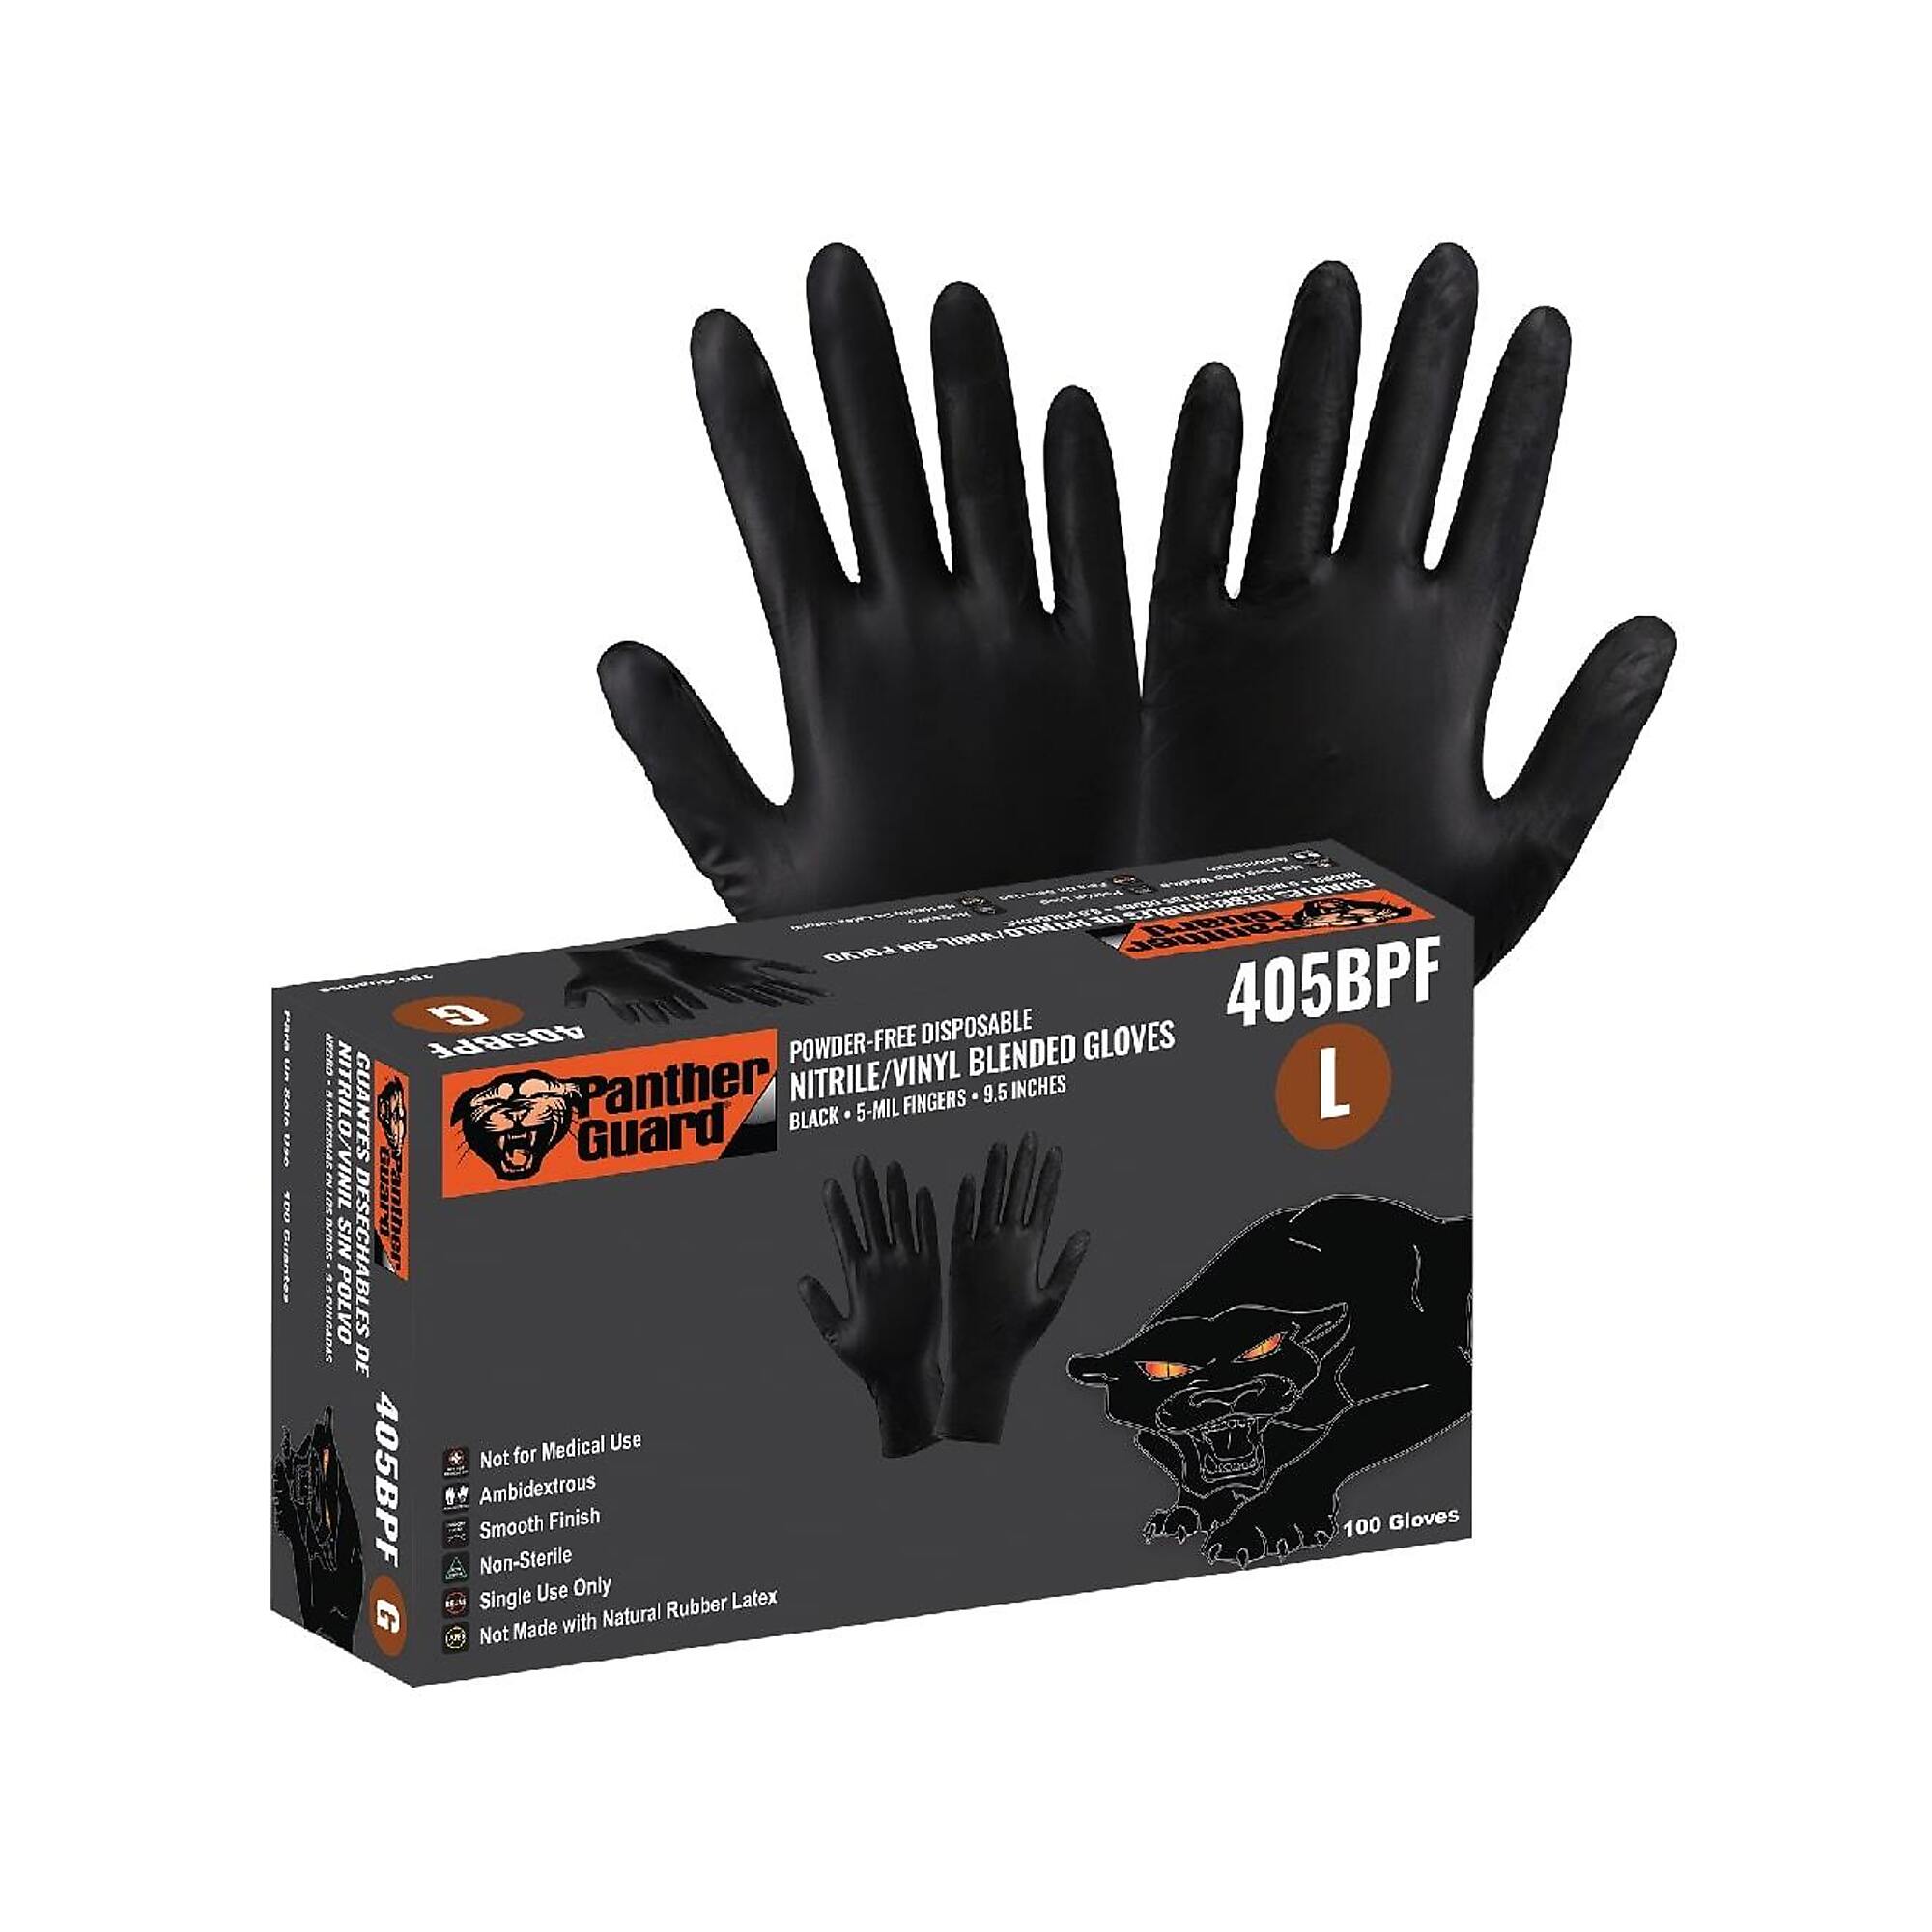 Global Glove Panther-Guard , 5-Mil, 9.5Inch, Black Nitrile/Vinyl, Smooth Finish - 500 Pairs, Size S, Color Black, Included (qty.) 1000 Model 405BPF-S